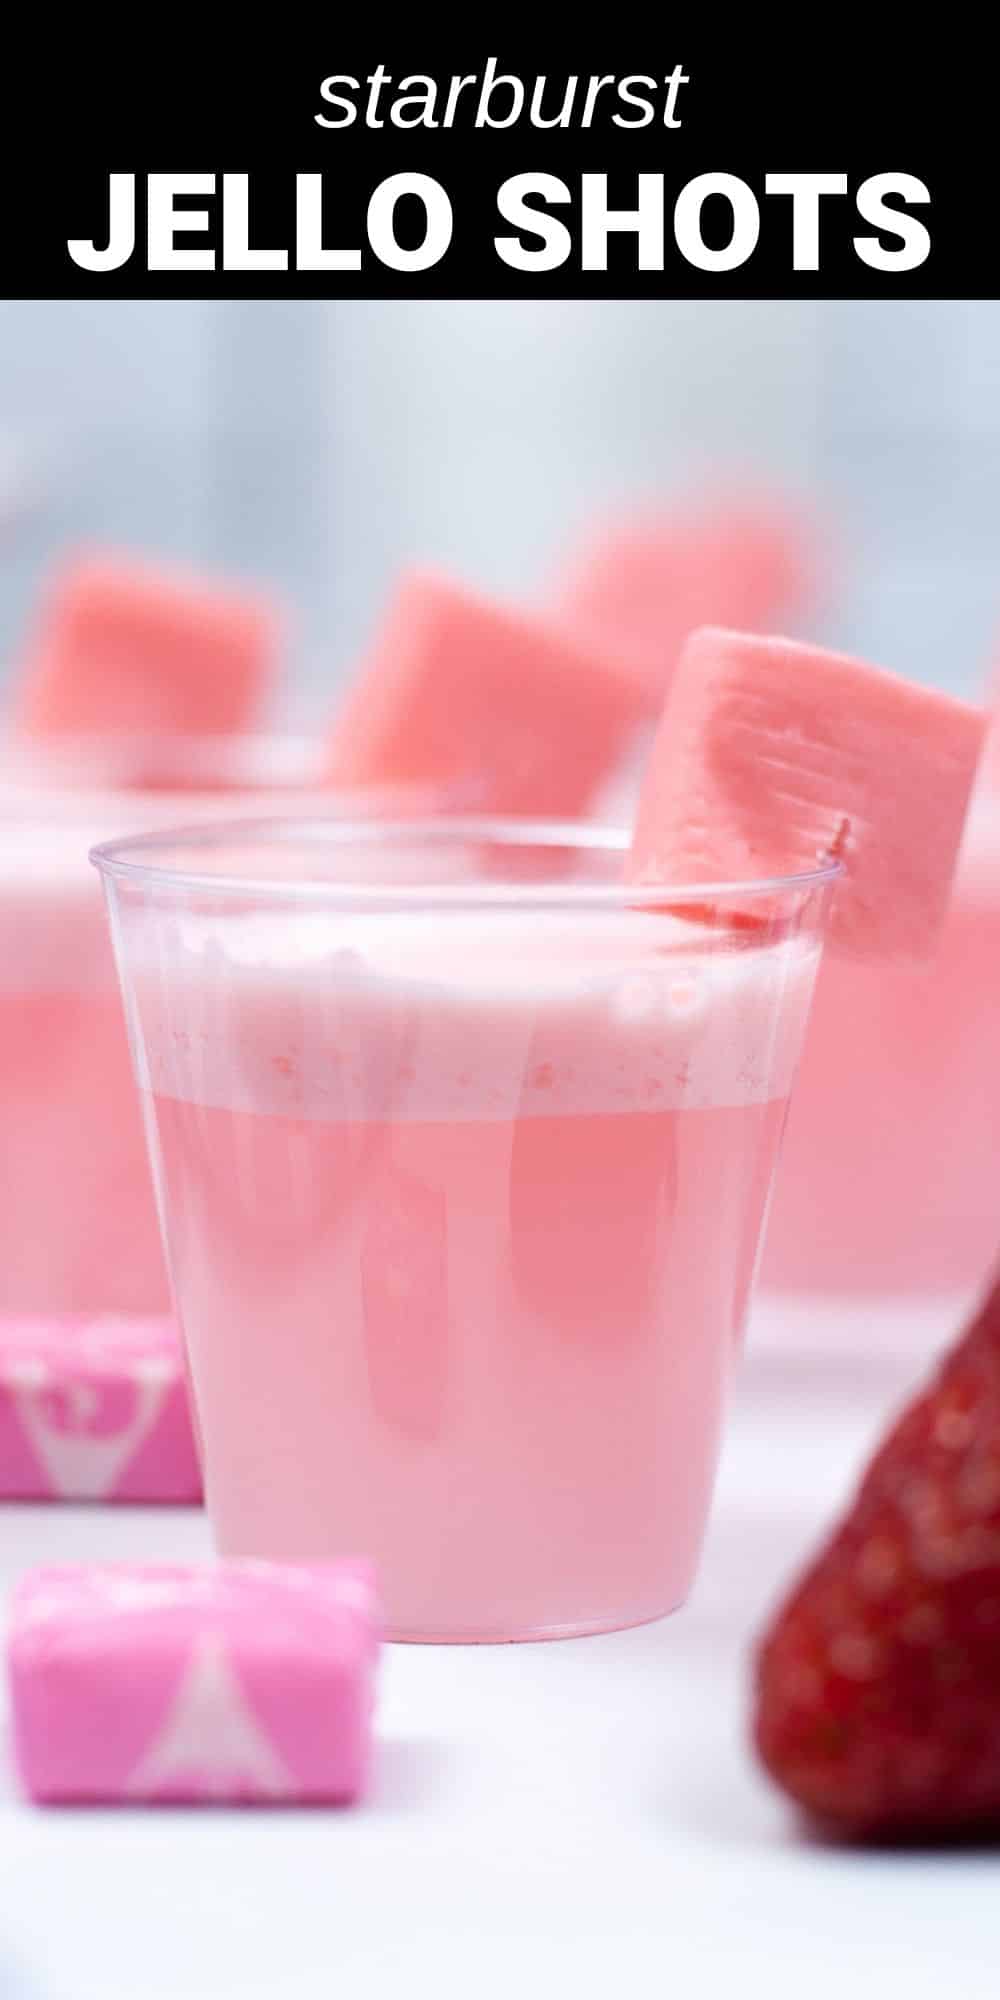 These Starburst Jello shots are a delicious and creamy strawberry Jello shot with the flavor of everyone’s favorite chewy fruit candies. Easy to make and perfect for parties, these are a fun and delicious twist on the classic Jello shot.